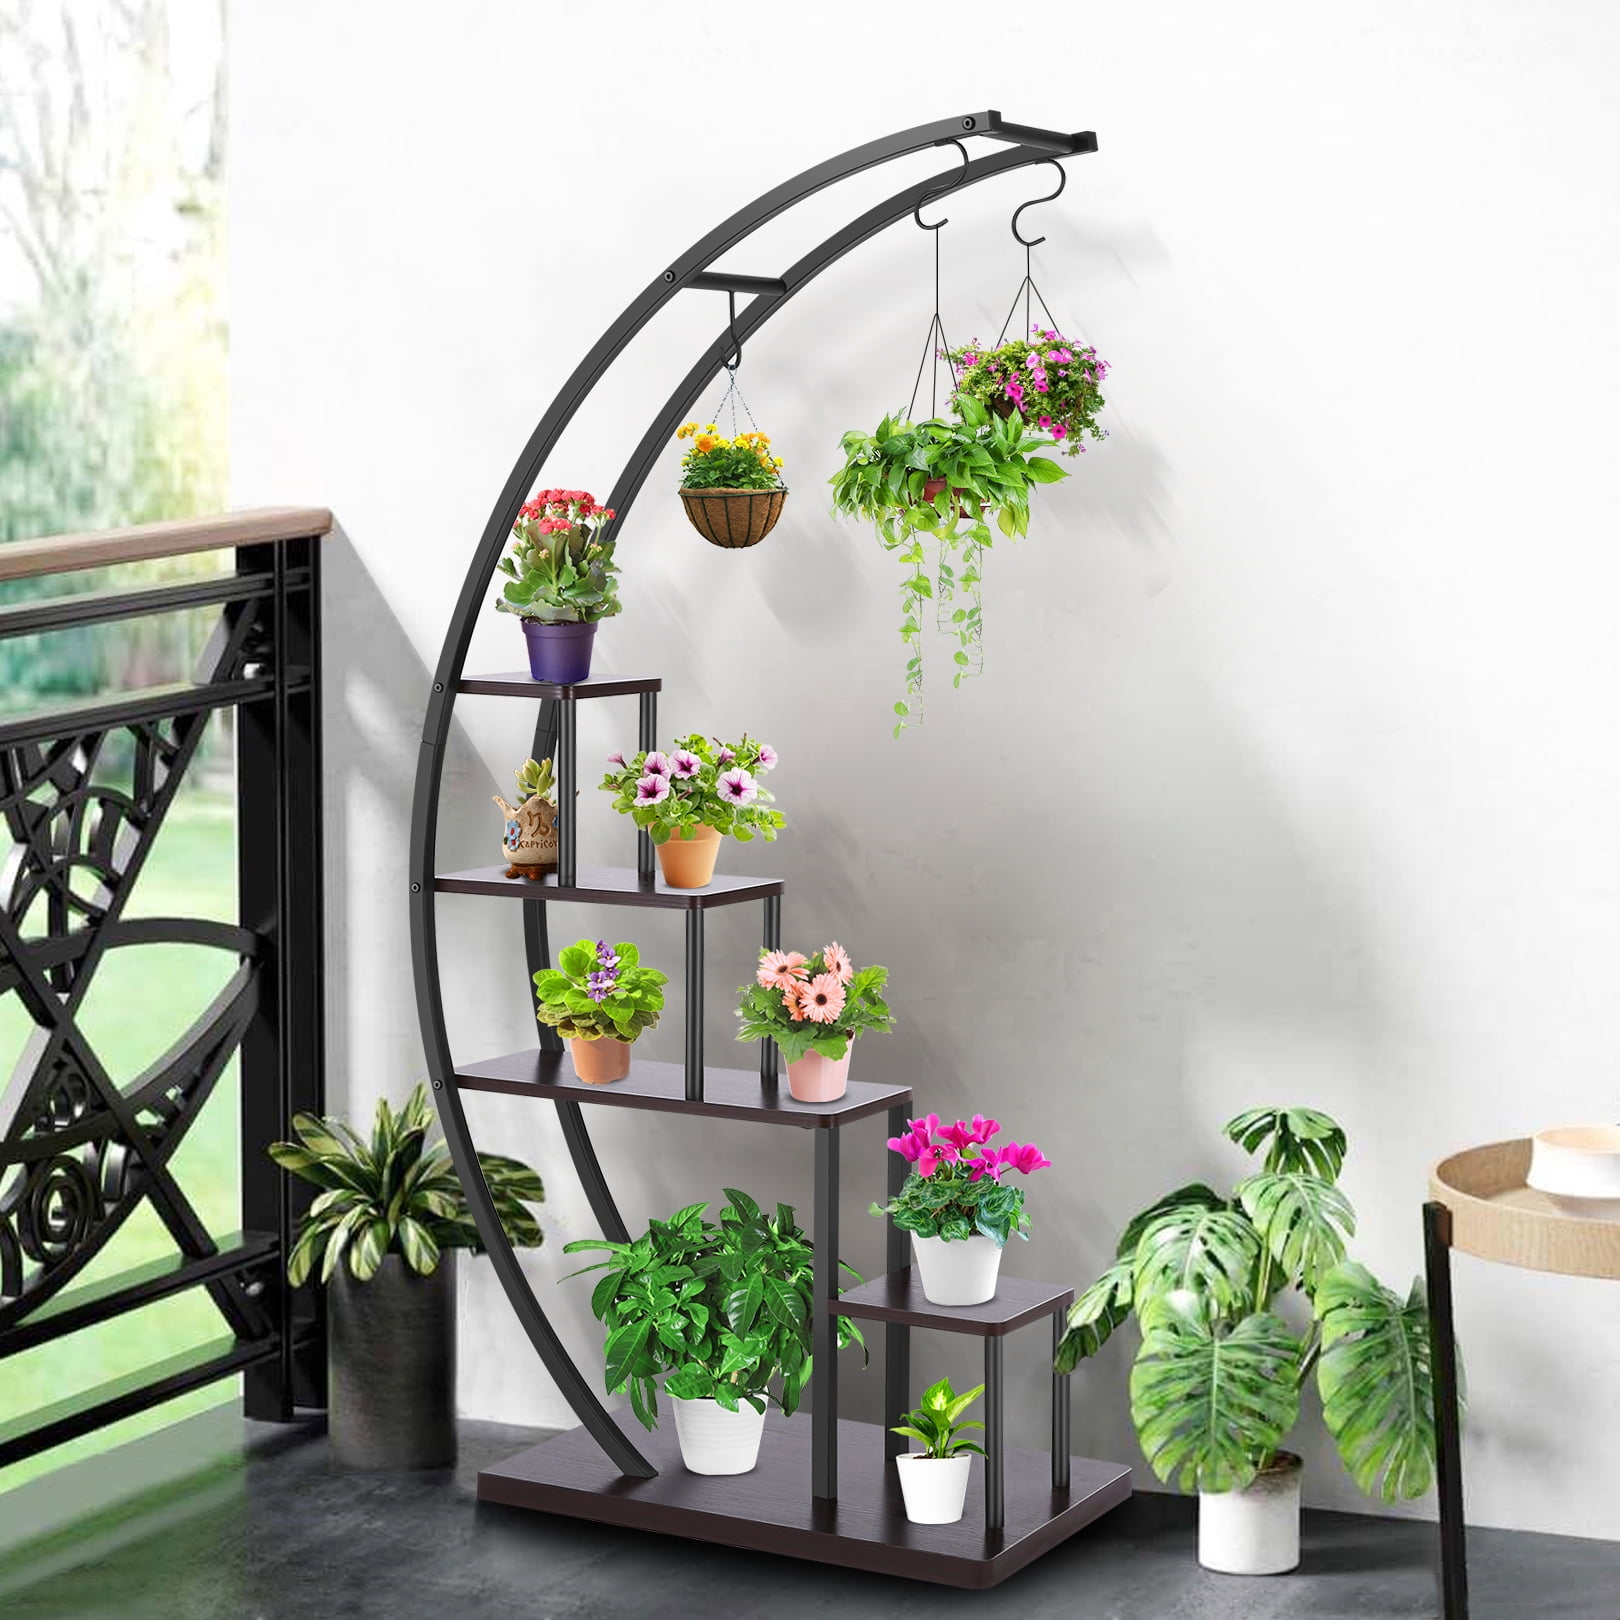 6 creative ways to include indoor plants into your home dcor